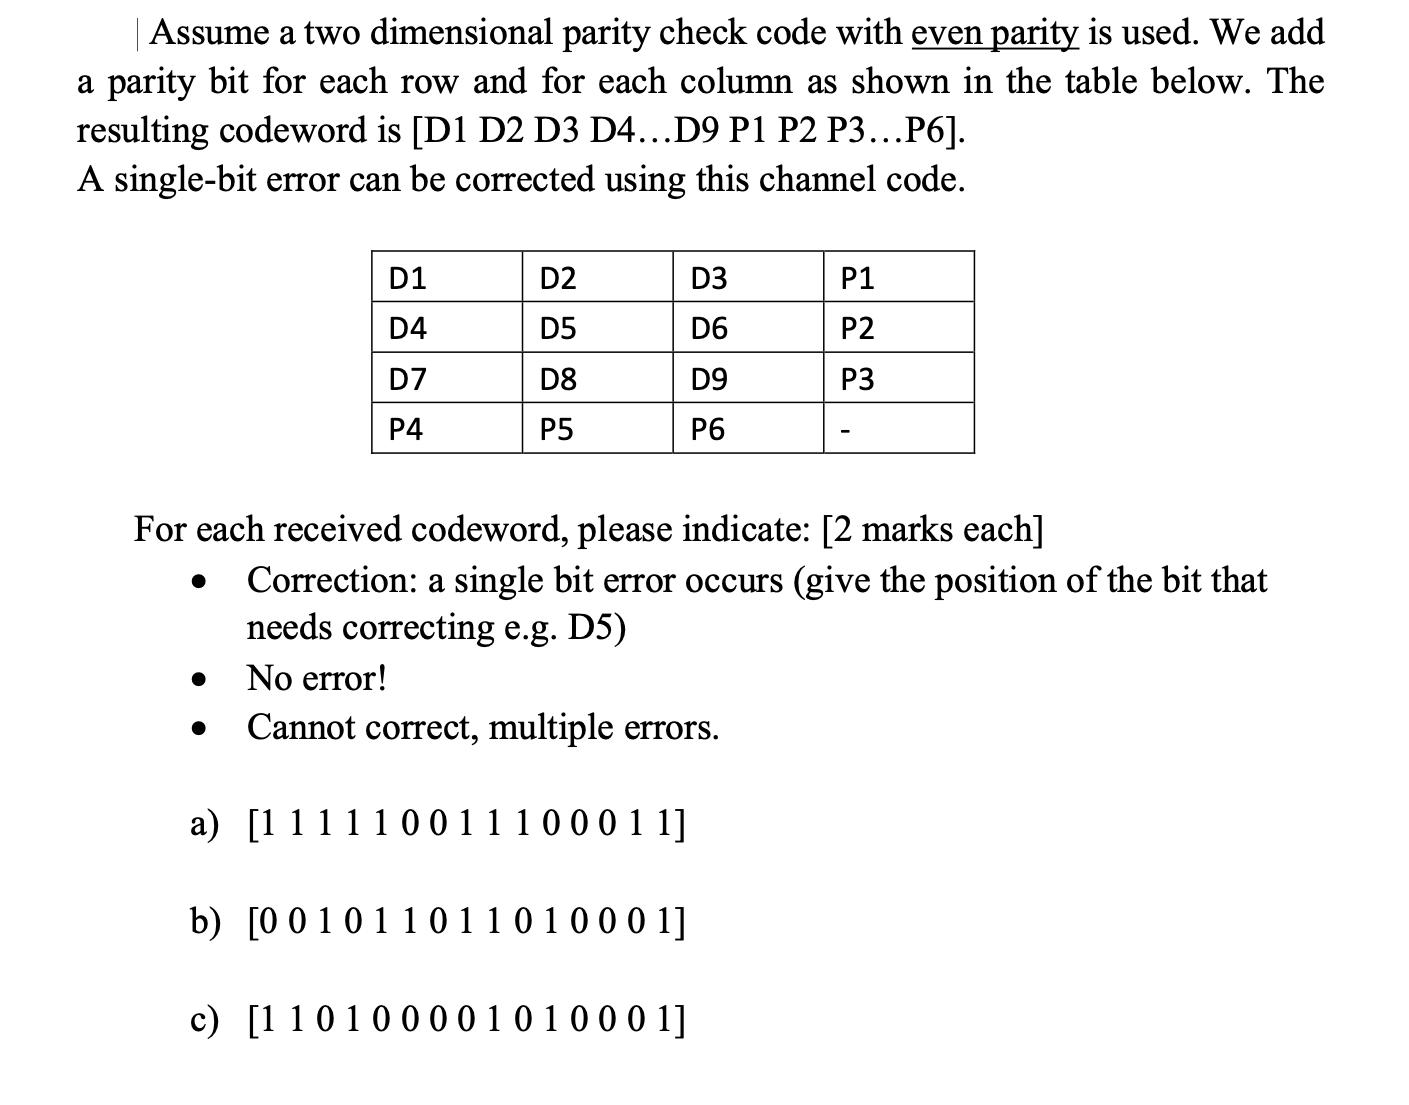 Assume a two dimensional parity check code with even parity is used. We add a parity bit for each row and for